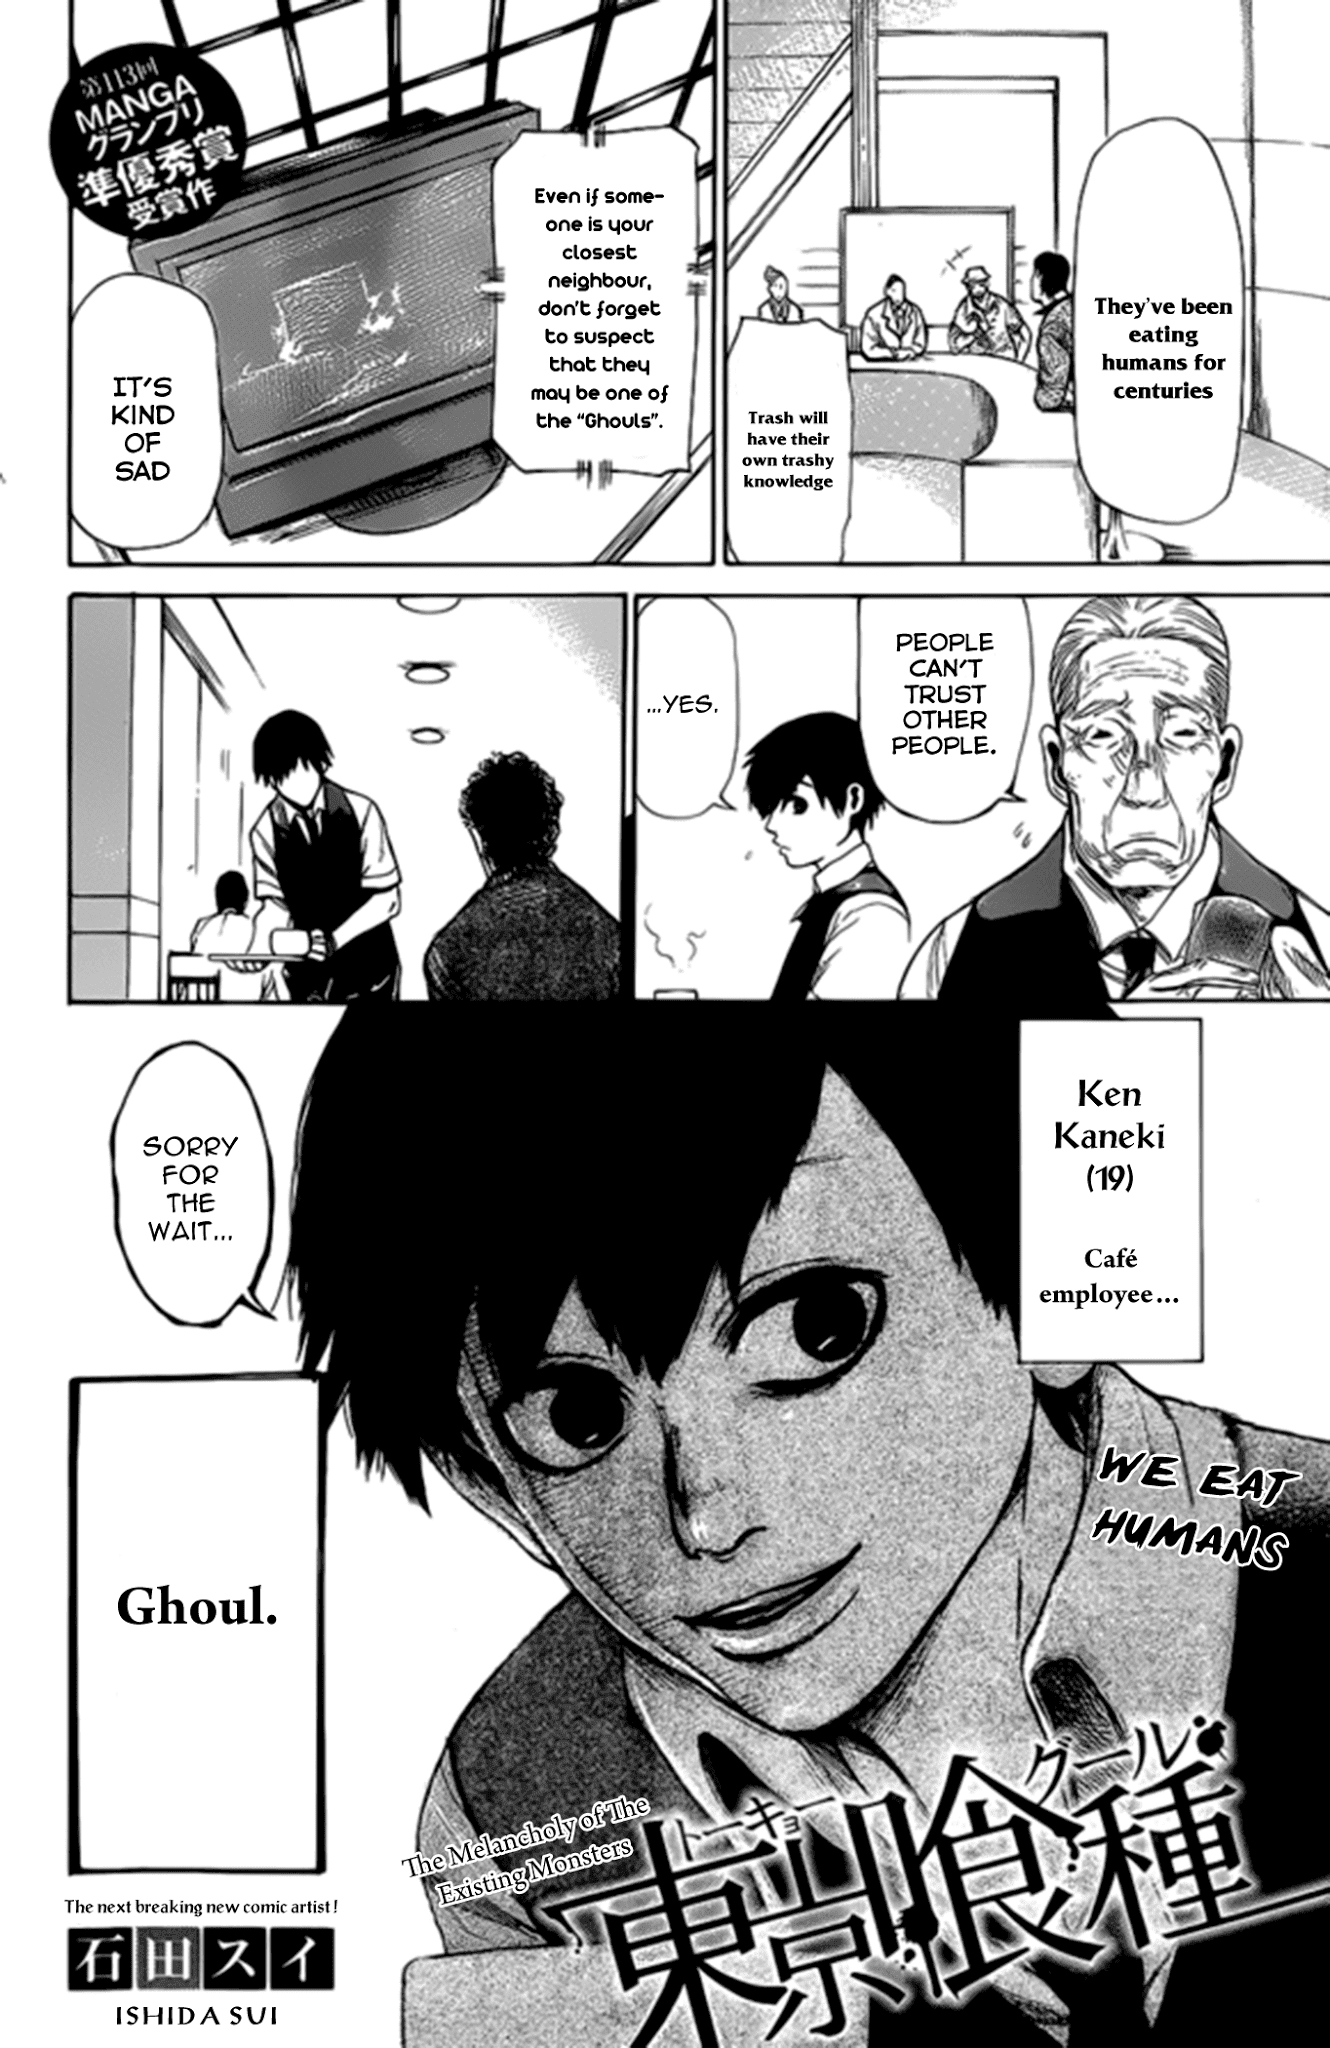 Tokyo Ghoul:re 113 - Read Tokyo Ghoul:re ch.113 Online For Free - Stream 3  Edition 1 Page All - MangaPark